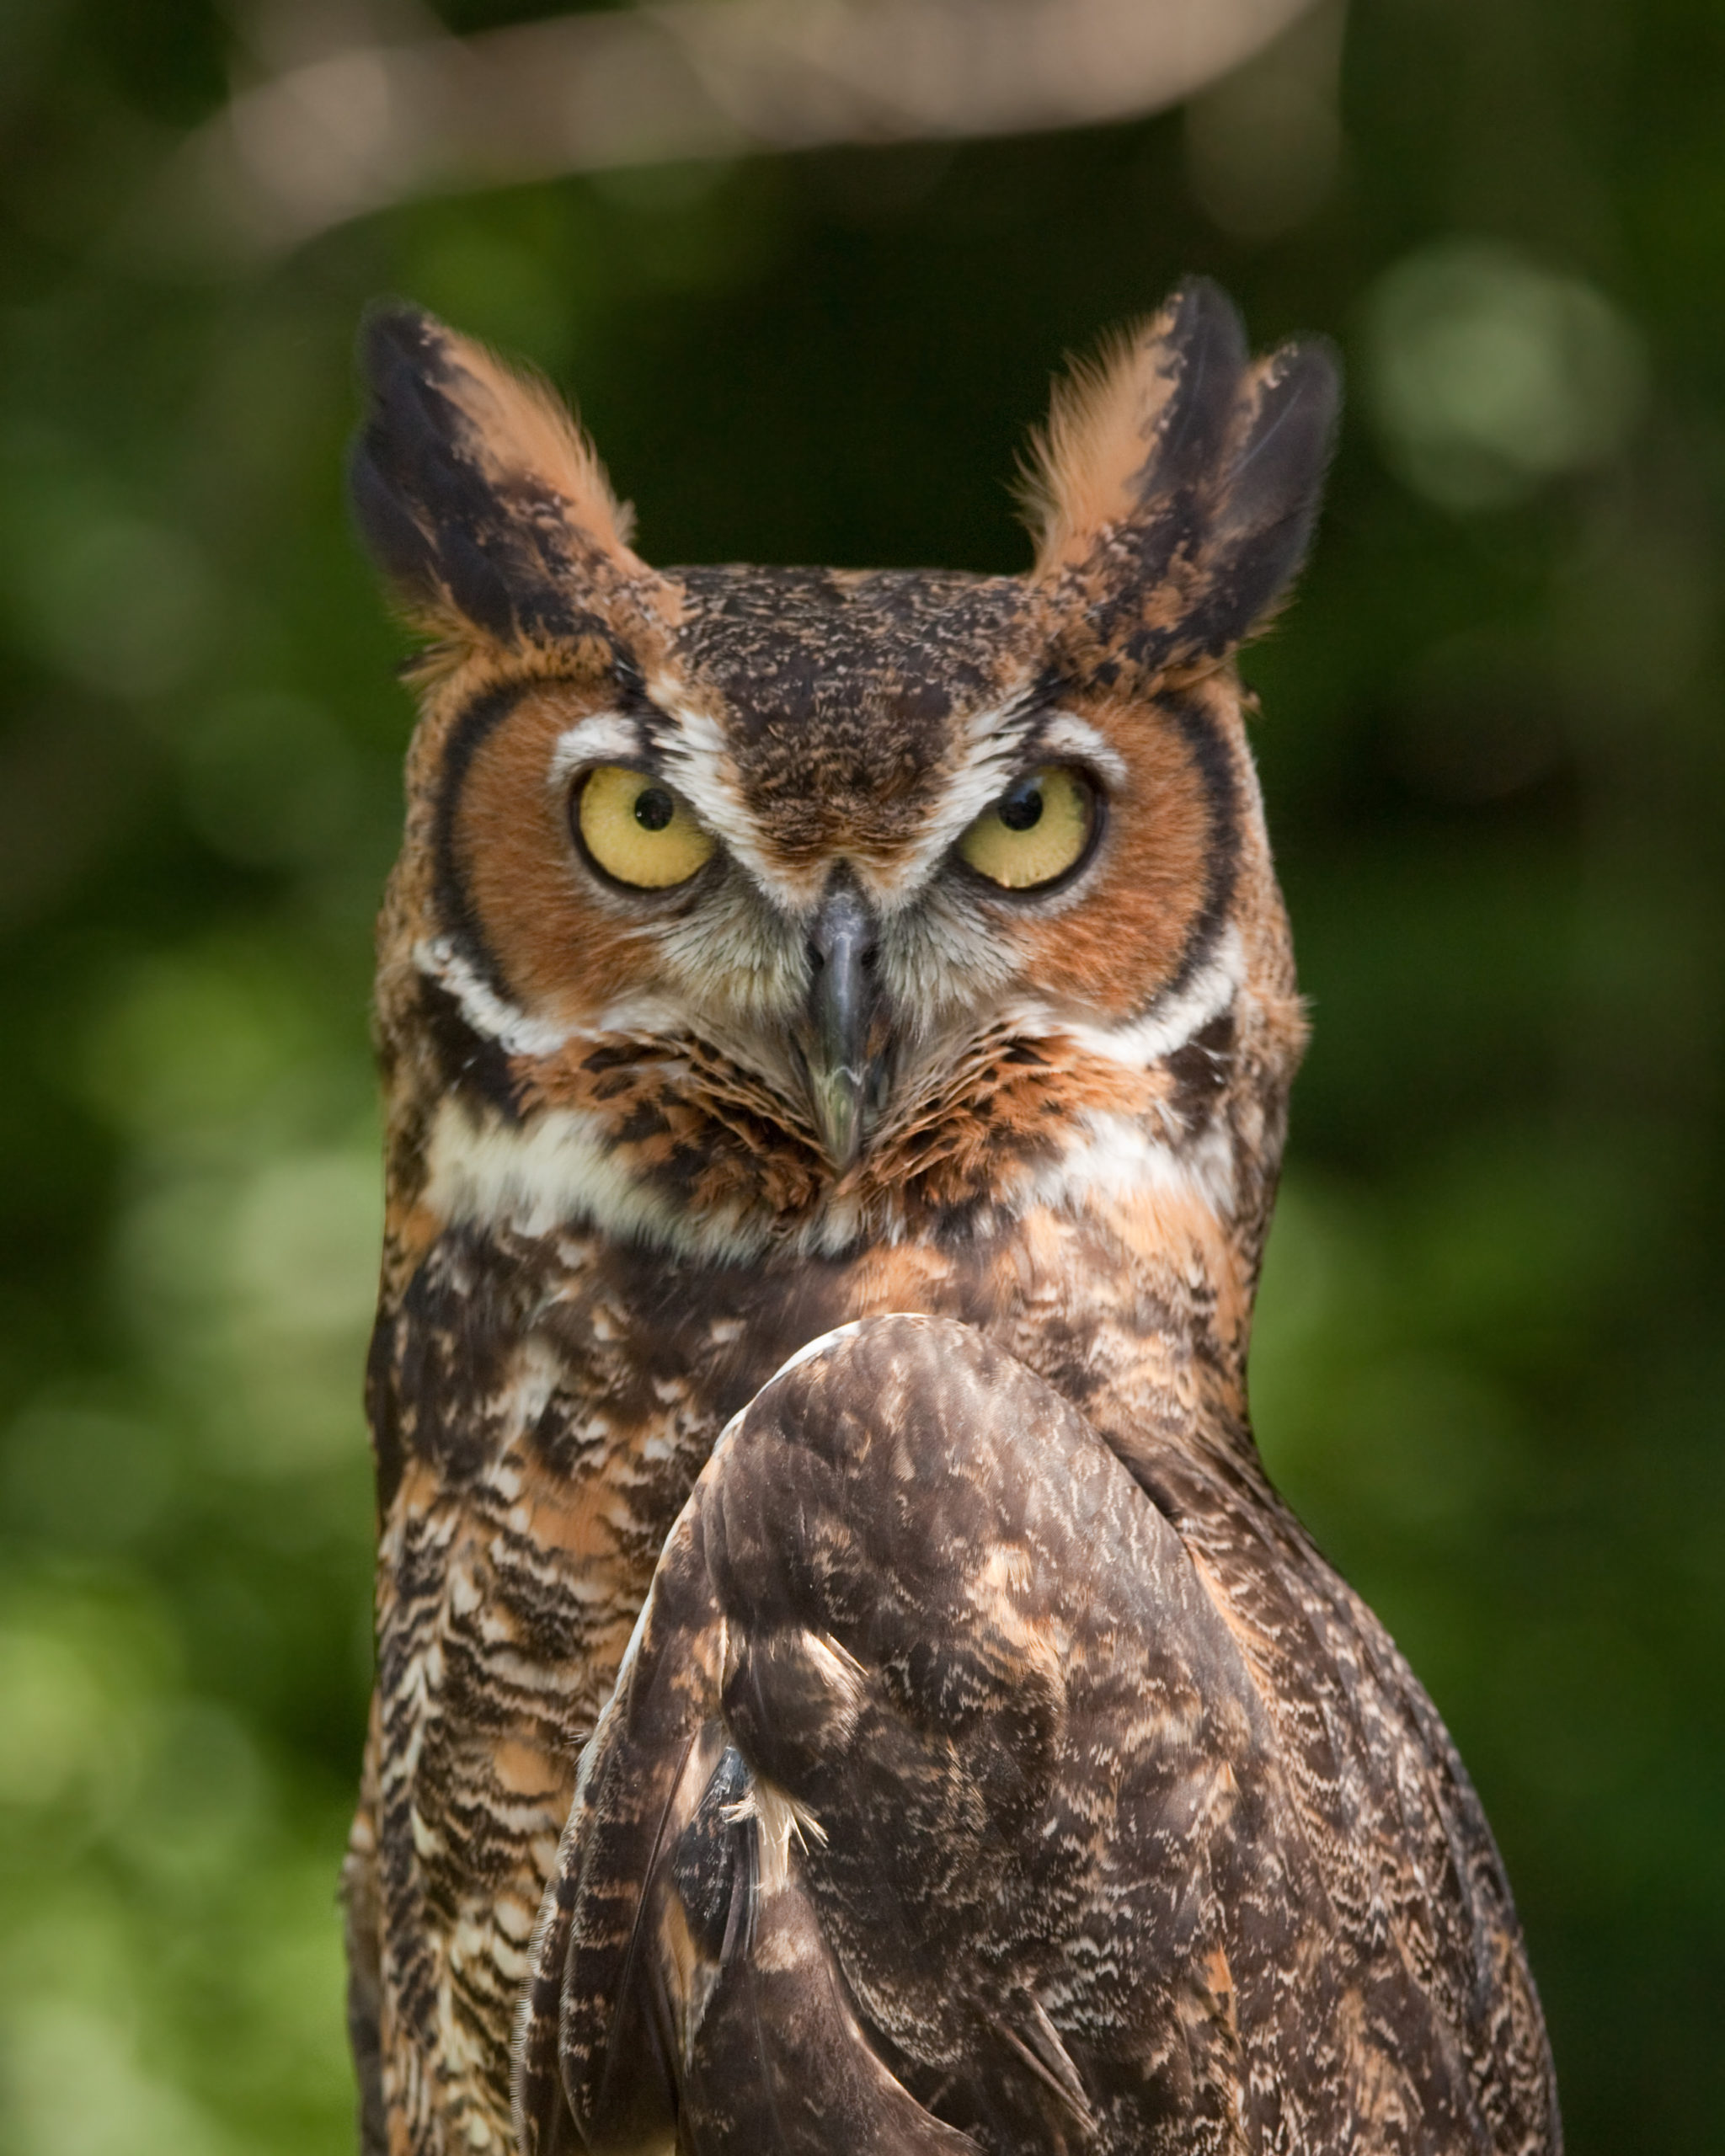 My Journey with a Pair of Great Horned Owls